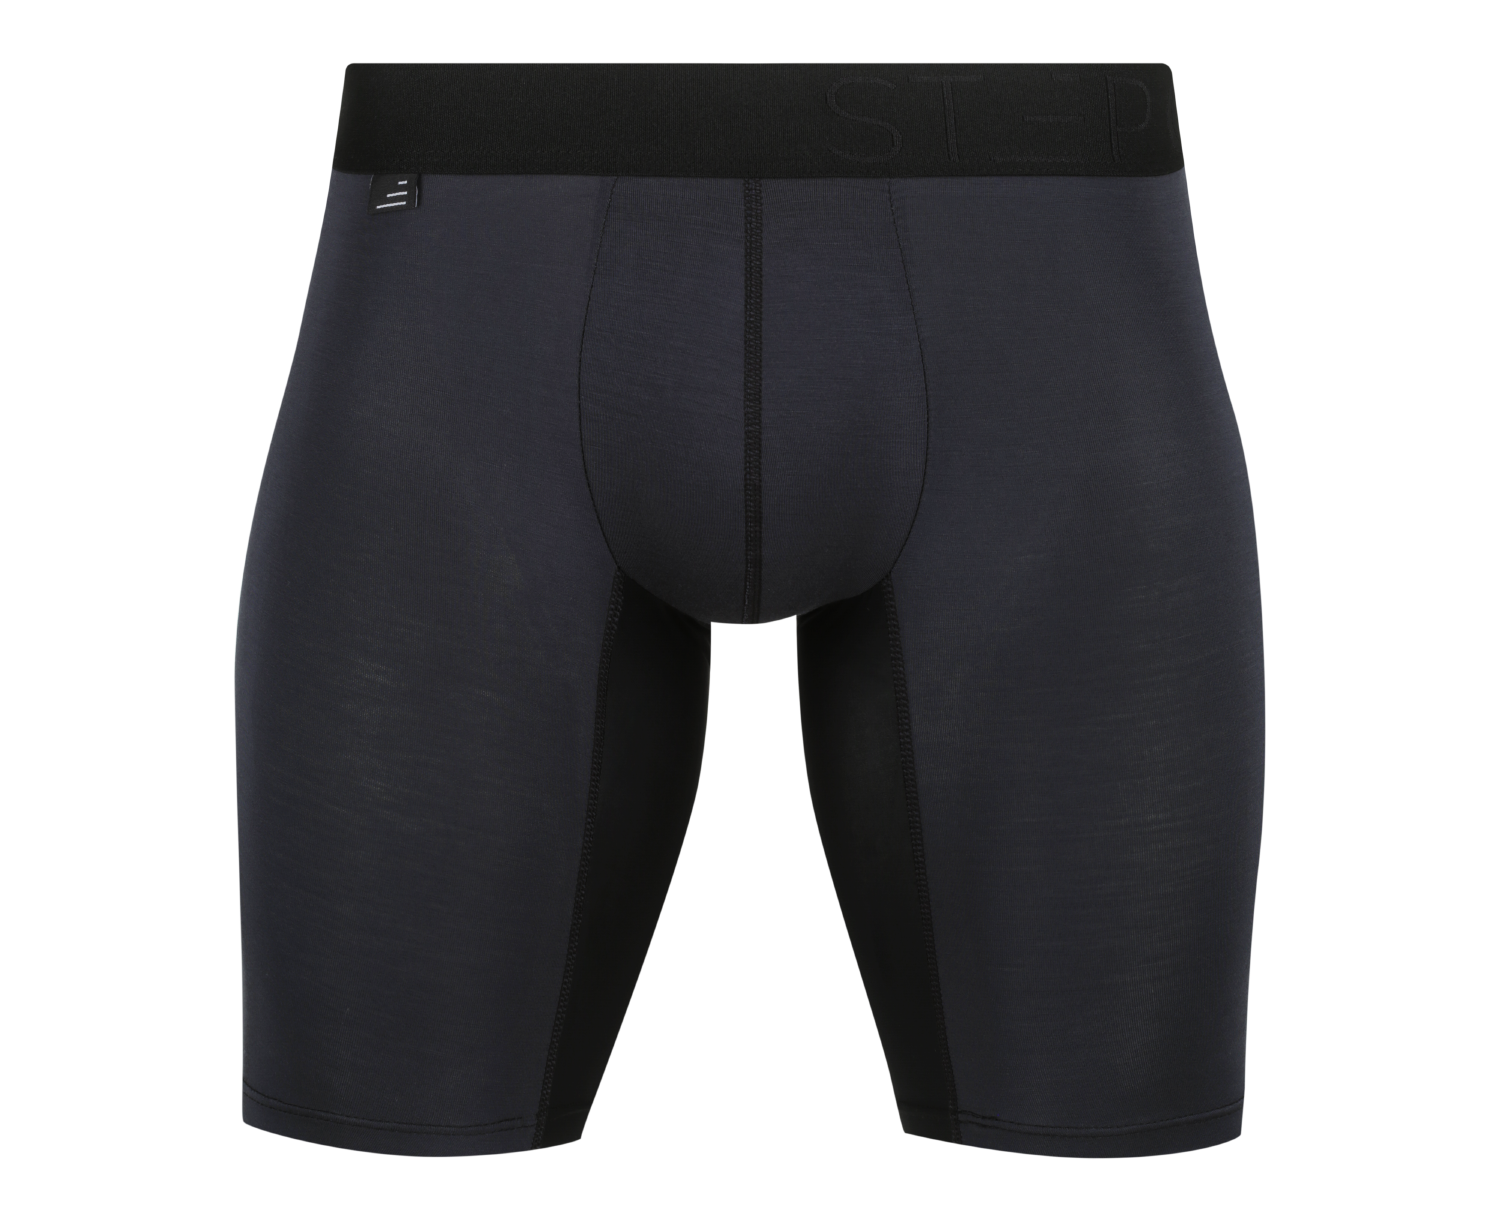 Step One Men's Bamboo Underwear Sports - Black Currants - Black Currants L  - 9 requests